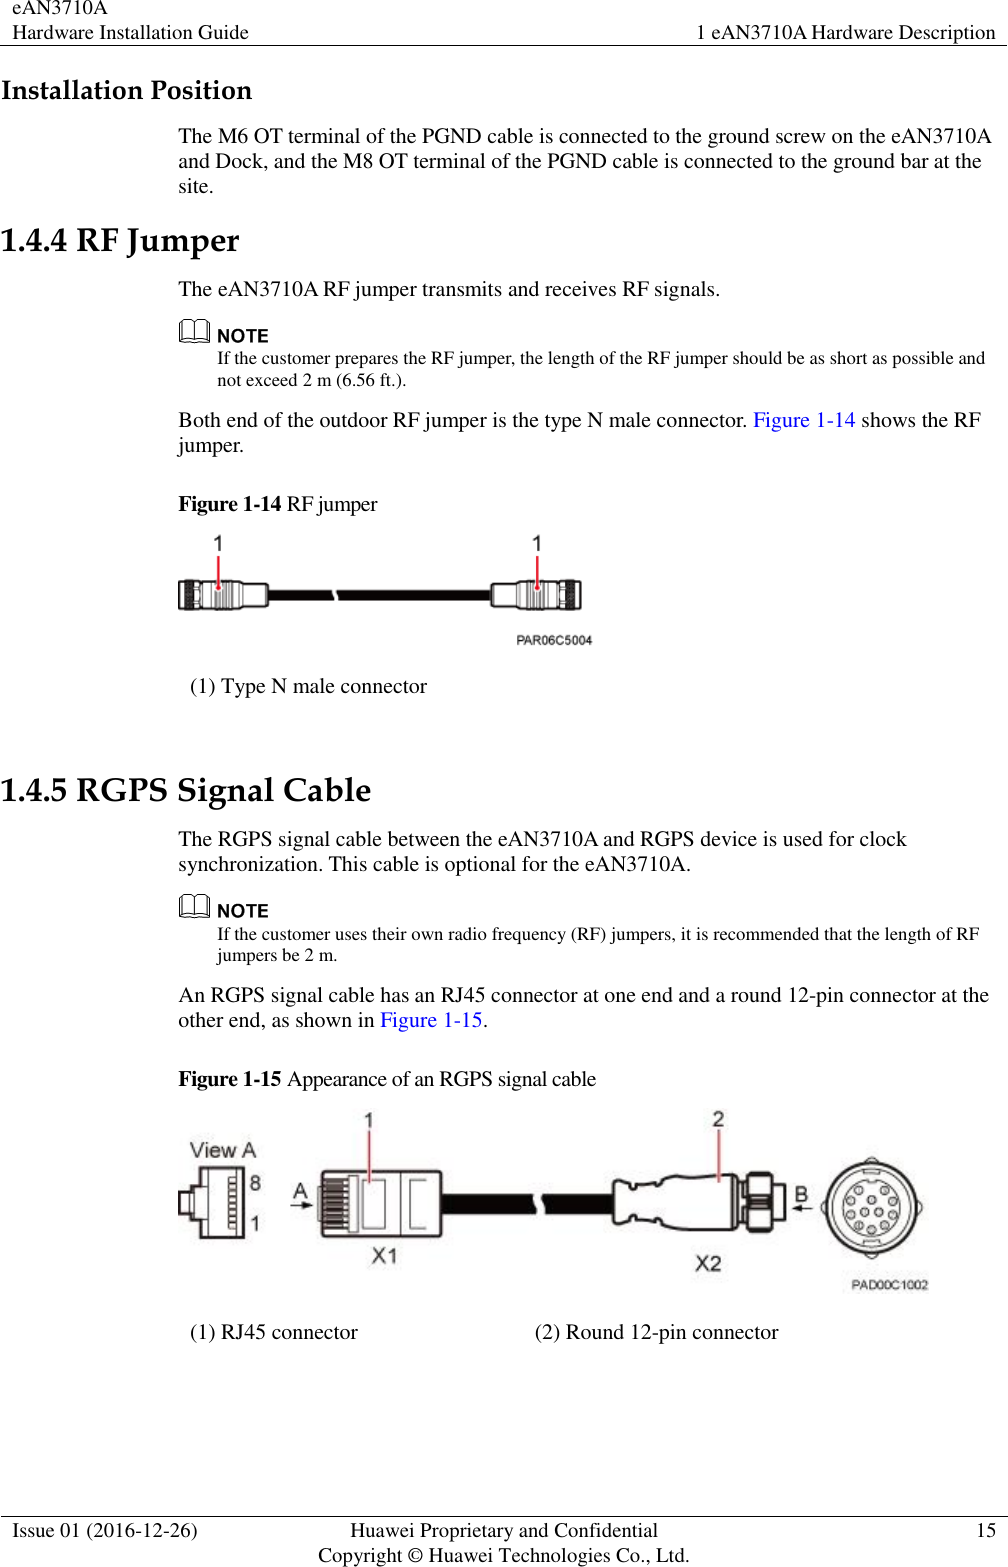 eAN3710A Hardware Installation Guide 1 eAN3710A Hardware Description  Issue 01 (2016-12-26) Huawei Proprietary and Confidential                                     Copyright © Huawei Technologies Co., Ltd. 15  Installation Position The M6 OT terminal of the PGND cable is connected to the ground screw on the eAN3710A and Dock, and the M8 OT terminal of the PGND cable is connected to the ground bar at the site.   1.4.4 RF Jumper The eAN3710A RF jumper transmits and receives RF signals.    If the customer prepares the RF jumper, the length of the RF jumper should be as short as possible and not exceed 2 m (6.56 ft.). Both end of the outdoor RF jumper is the type N male connector. Figure 1-14 shows the RF jumper. Figure 1-14 RF jumper  (1) Type N male connector  1.4.5 RGPS Signal Cable The RGPS signal cable between the eAN3710A and RGPS device is used for clock synchronization. This cable is optional for the eAN3710A.    If the customer uses their own radio frequency (RF) jumpers, it is recommended that the length of RF jumpers be 2 m. An RGPS signal cable has an RJ45 connector at one end and a round 12-pin connector at the other end, as shown in Figure 1-15. Figure 1-15 Appearance of an RGPS signal cable  (1) RJ45 connector (2) Round 12-pin connector       